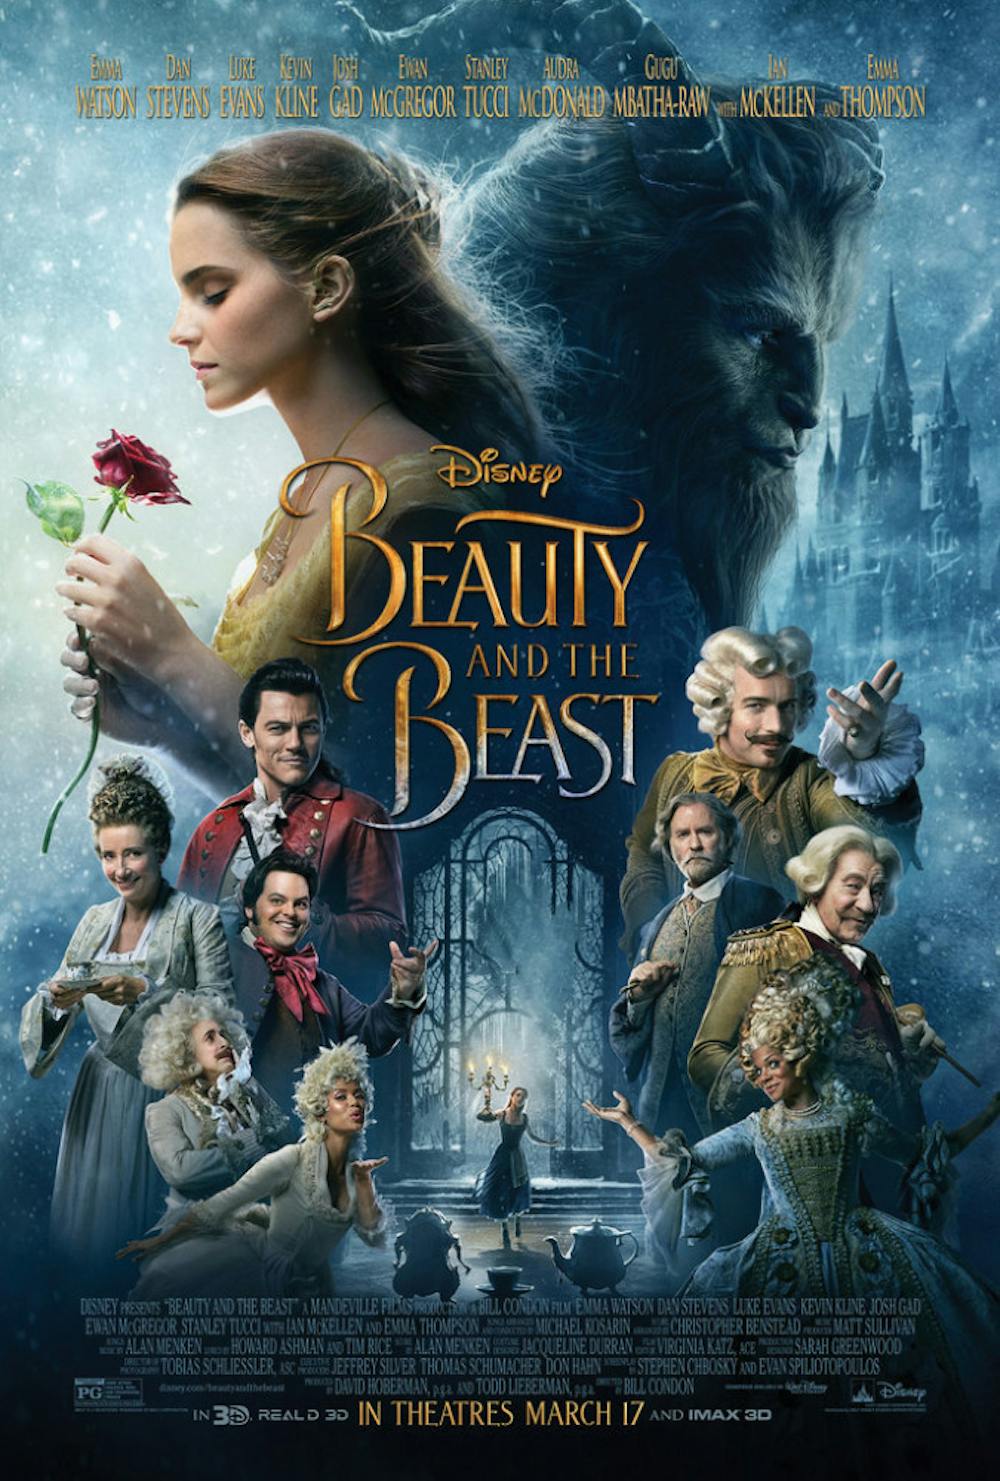  Stars such as Emma Watson and Luke Evans breathe new life into the beloved Disney classic.